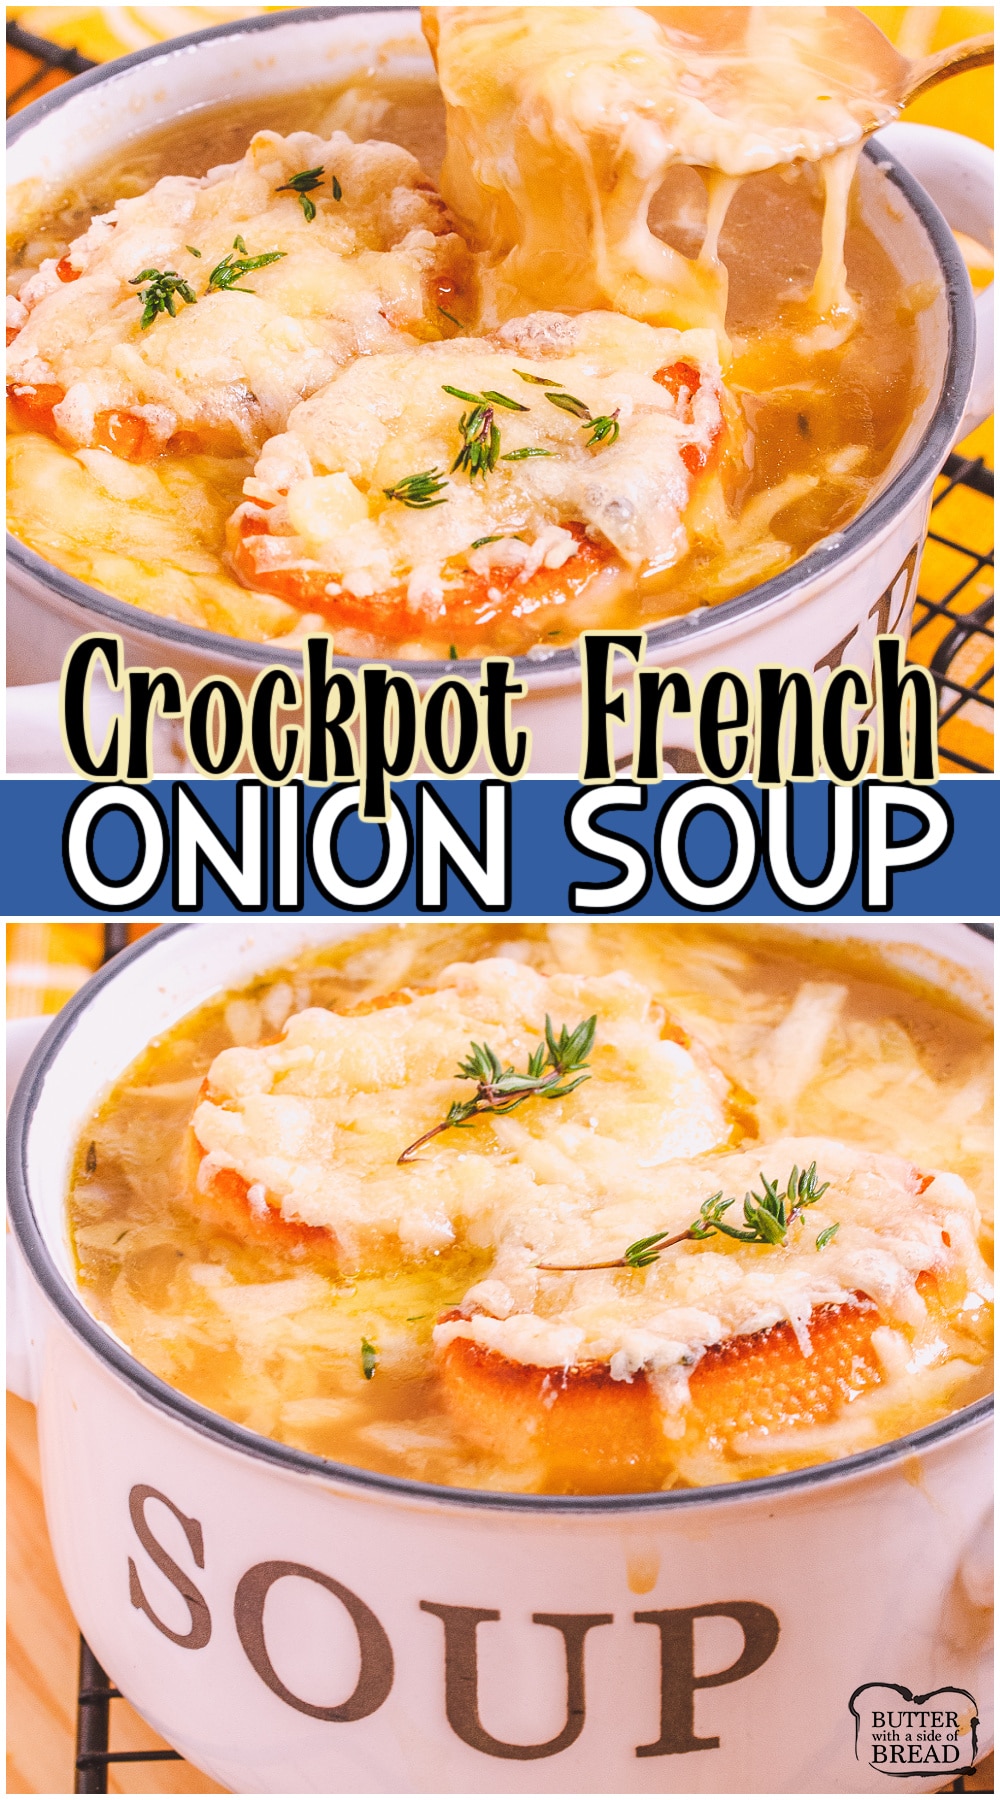 Slow Cooker French Onion Soup is made with caramelized onions & beef broth for a flavorful savory soup. French Onion Soup made easy in the crockpot for a simple & satisfying dinner!  